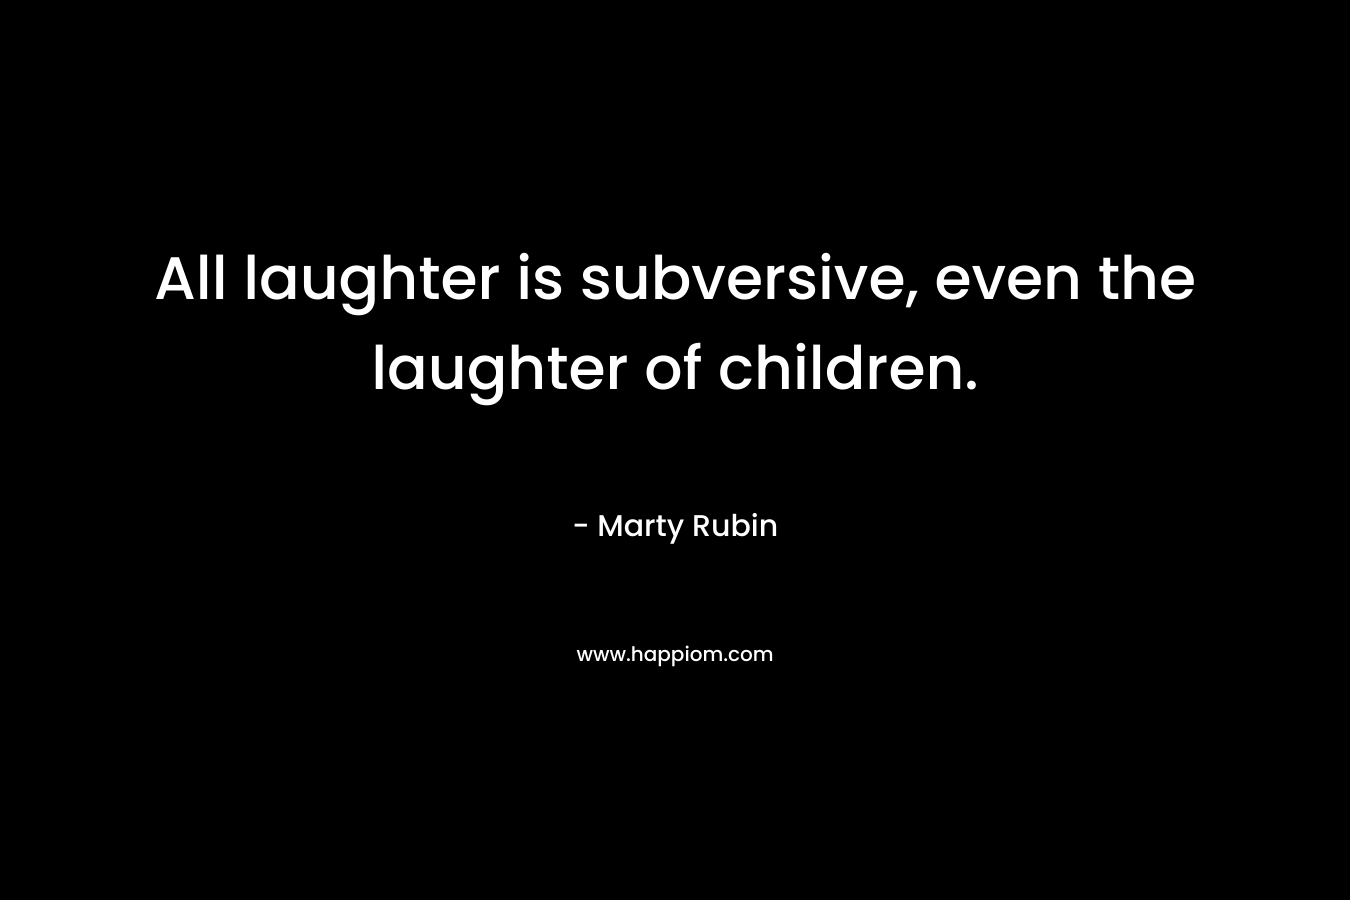 All laughter is subversive, even the laughter of children.